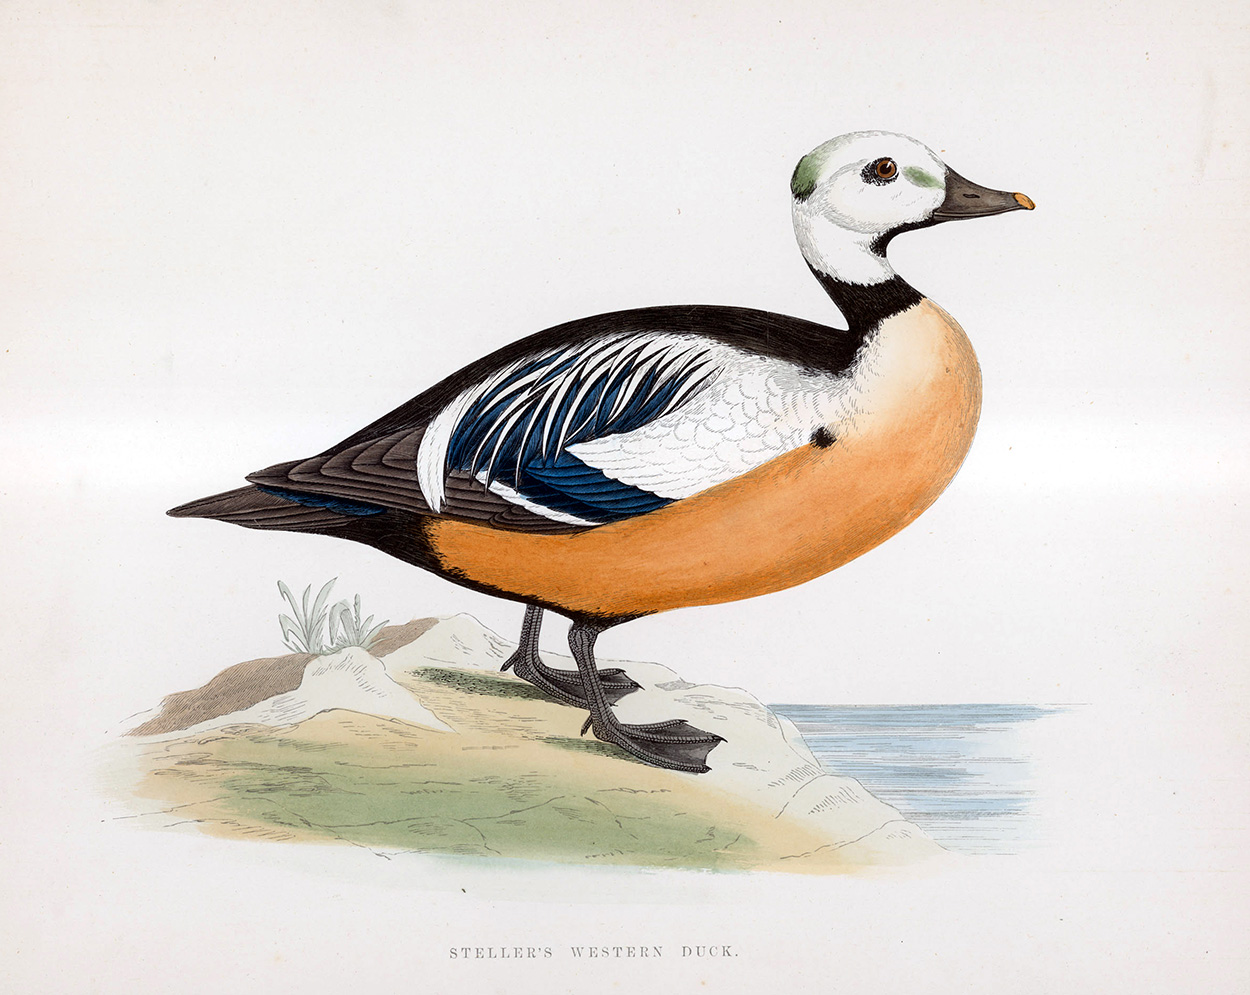 Steller's Western Duck - hand coloured lithograph 1891 (Print) art by Beverley R Morris at The Illustration Art Gallery